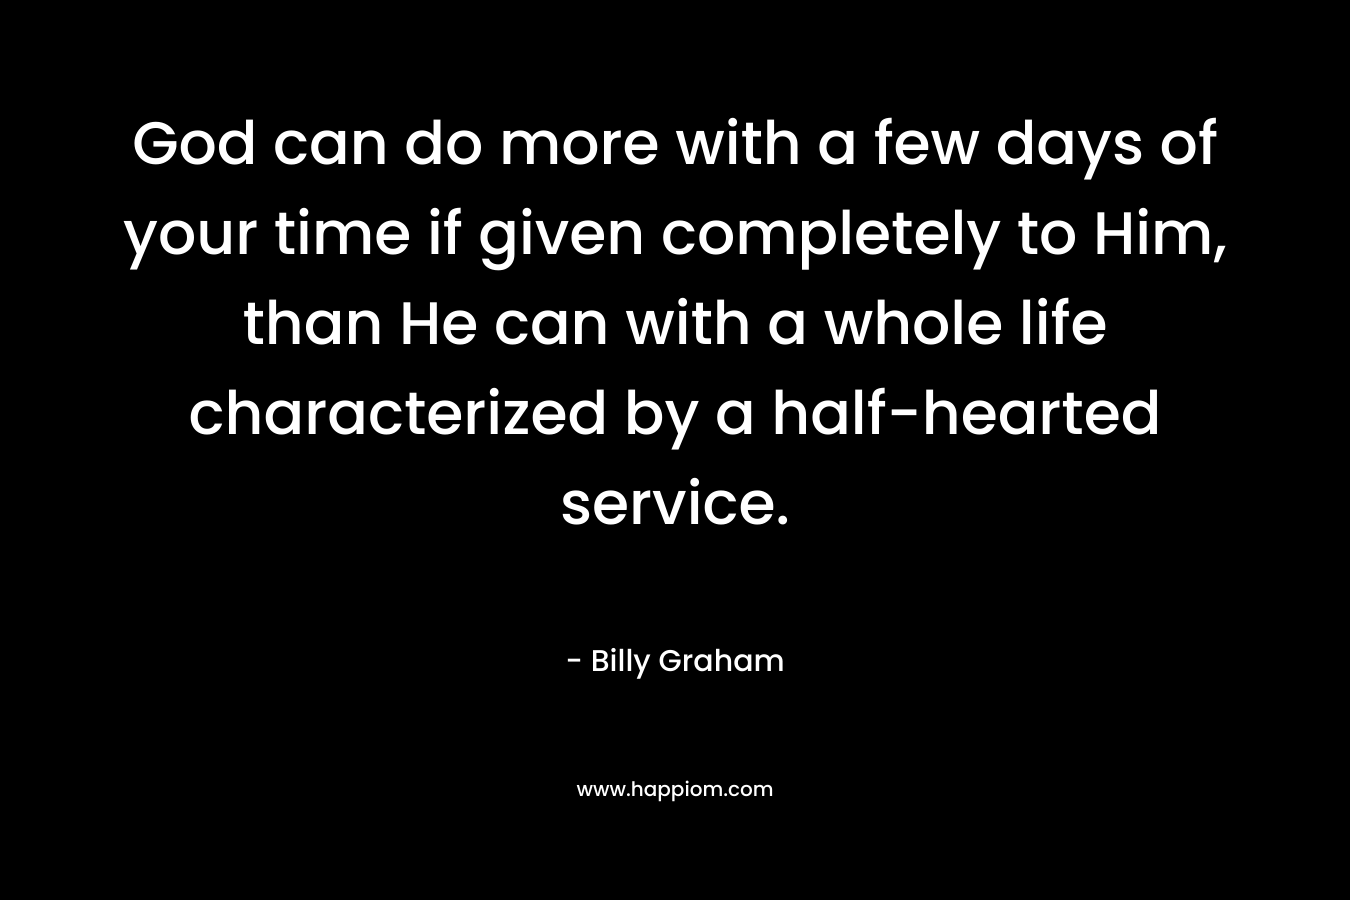 God can do more with a few days of your time if given completely to Him, than He can with a whole life characterized by a half-hearted service.